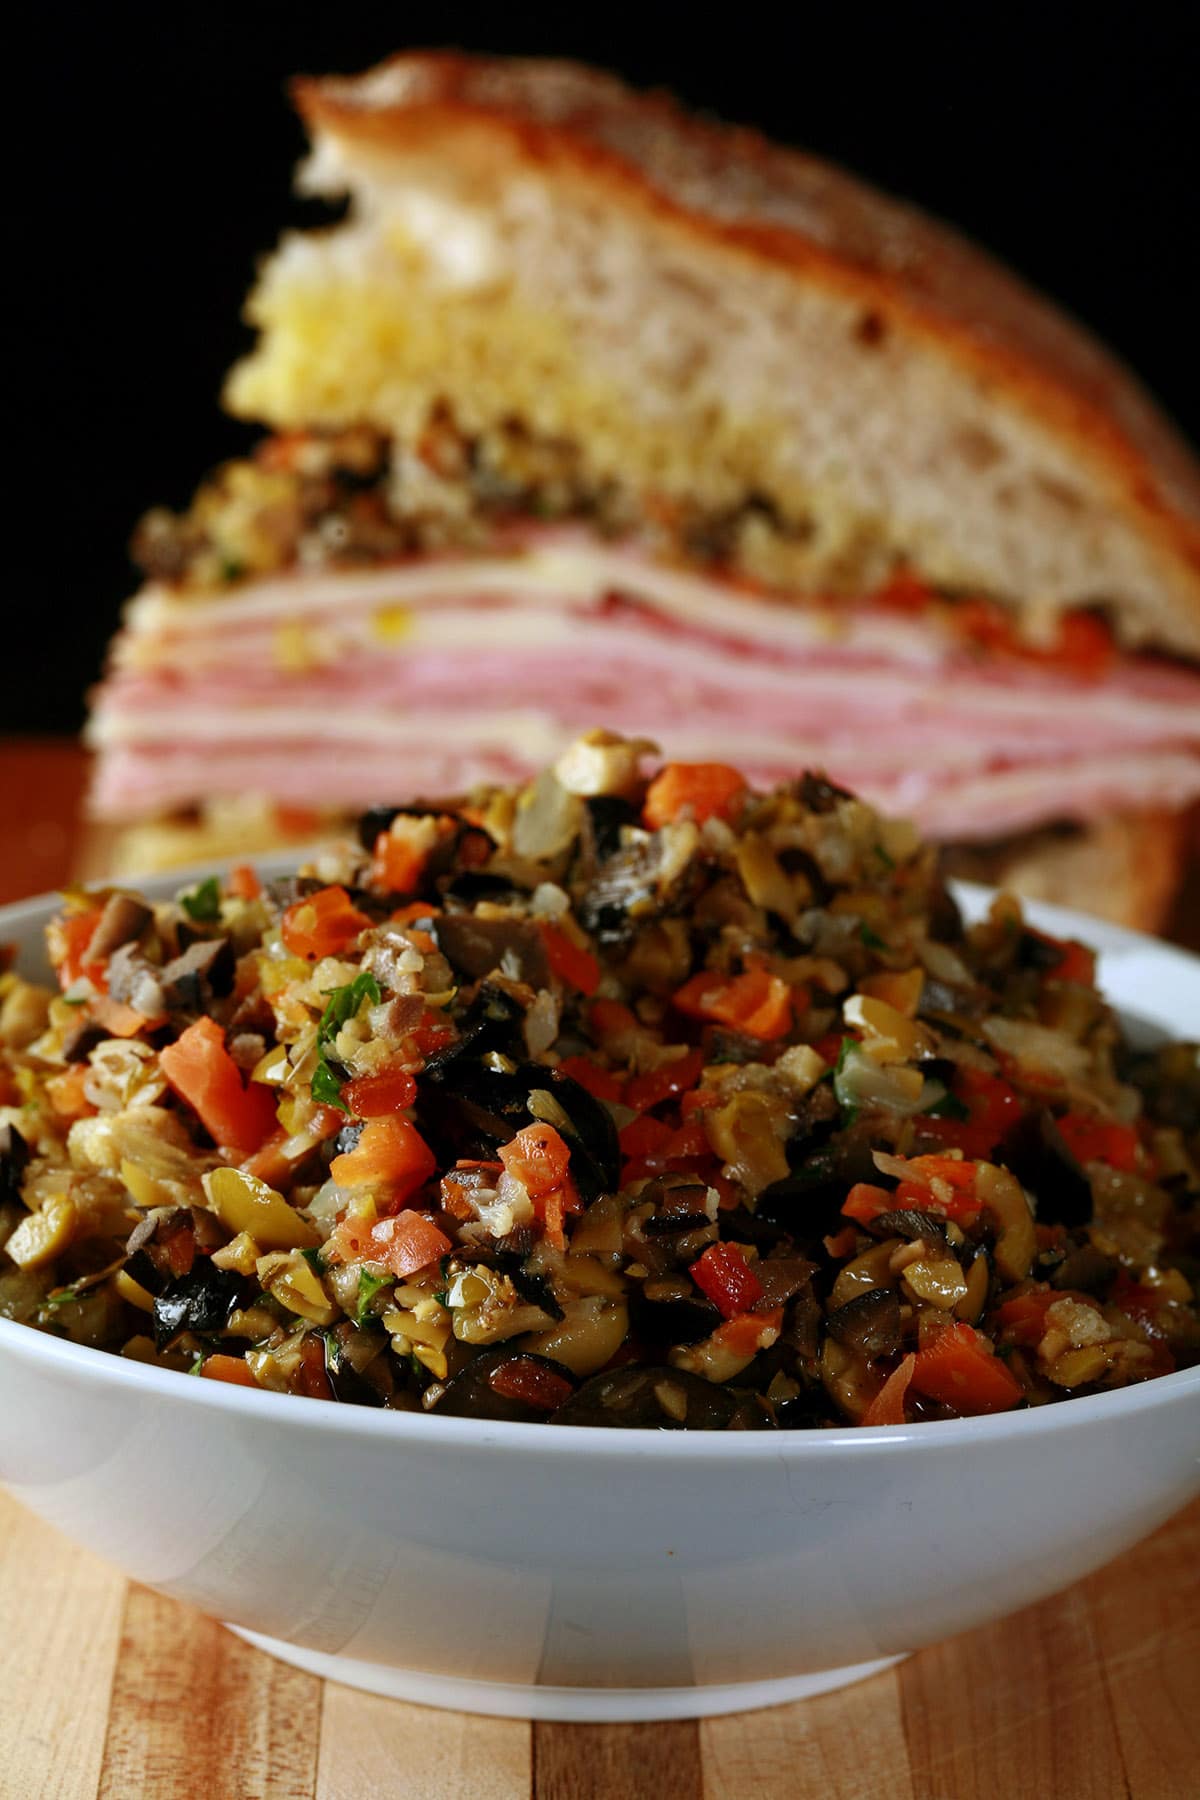 A bowl of olive salad in front of a wedge of muffaletta.